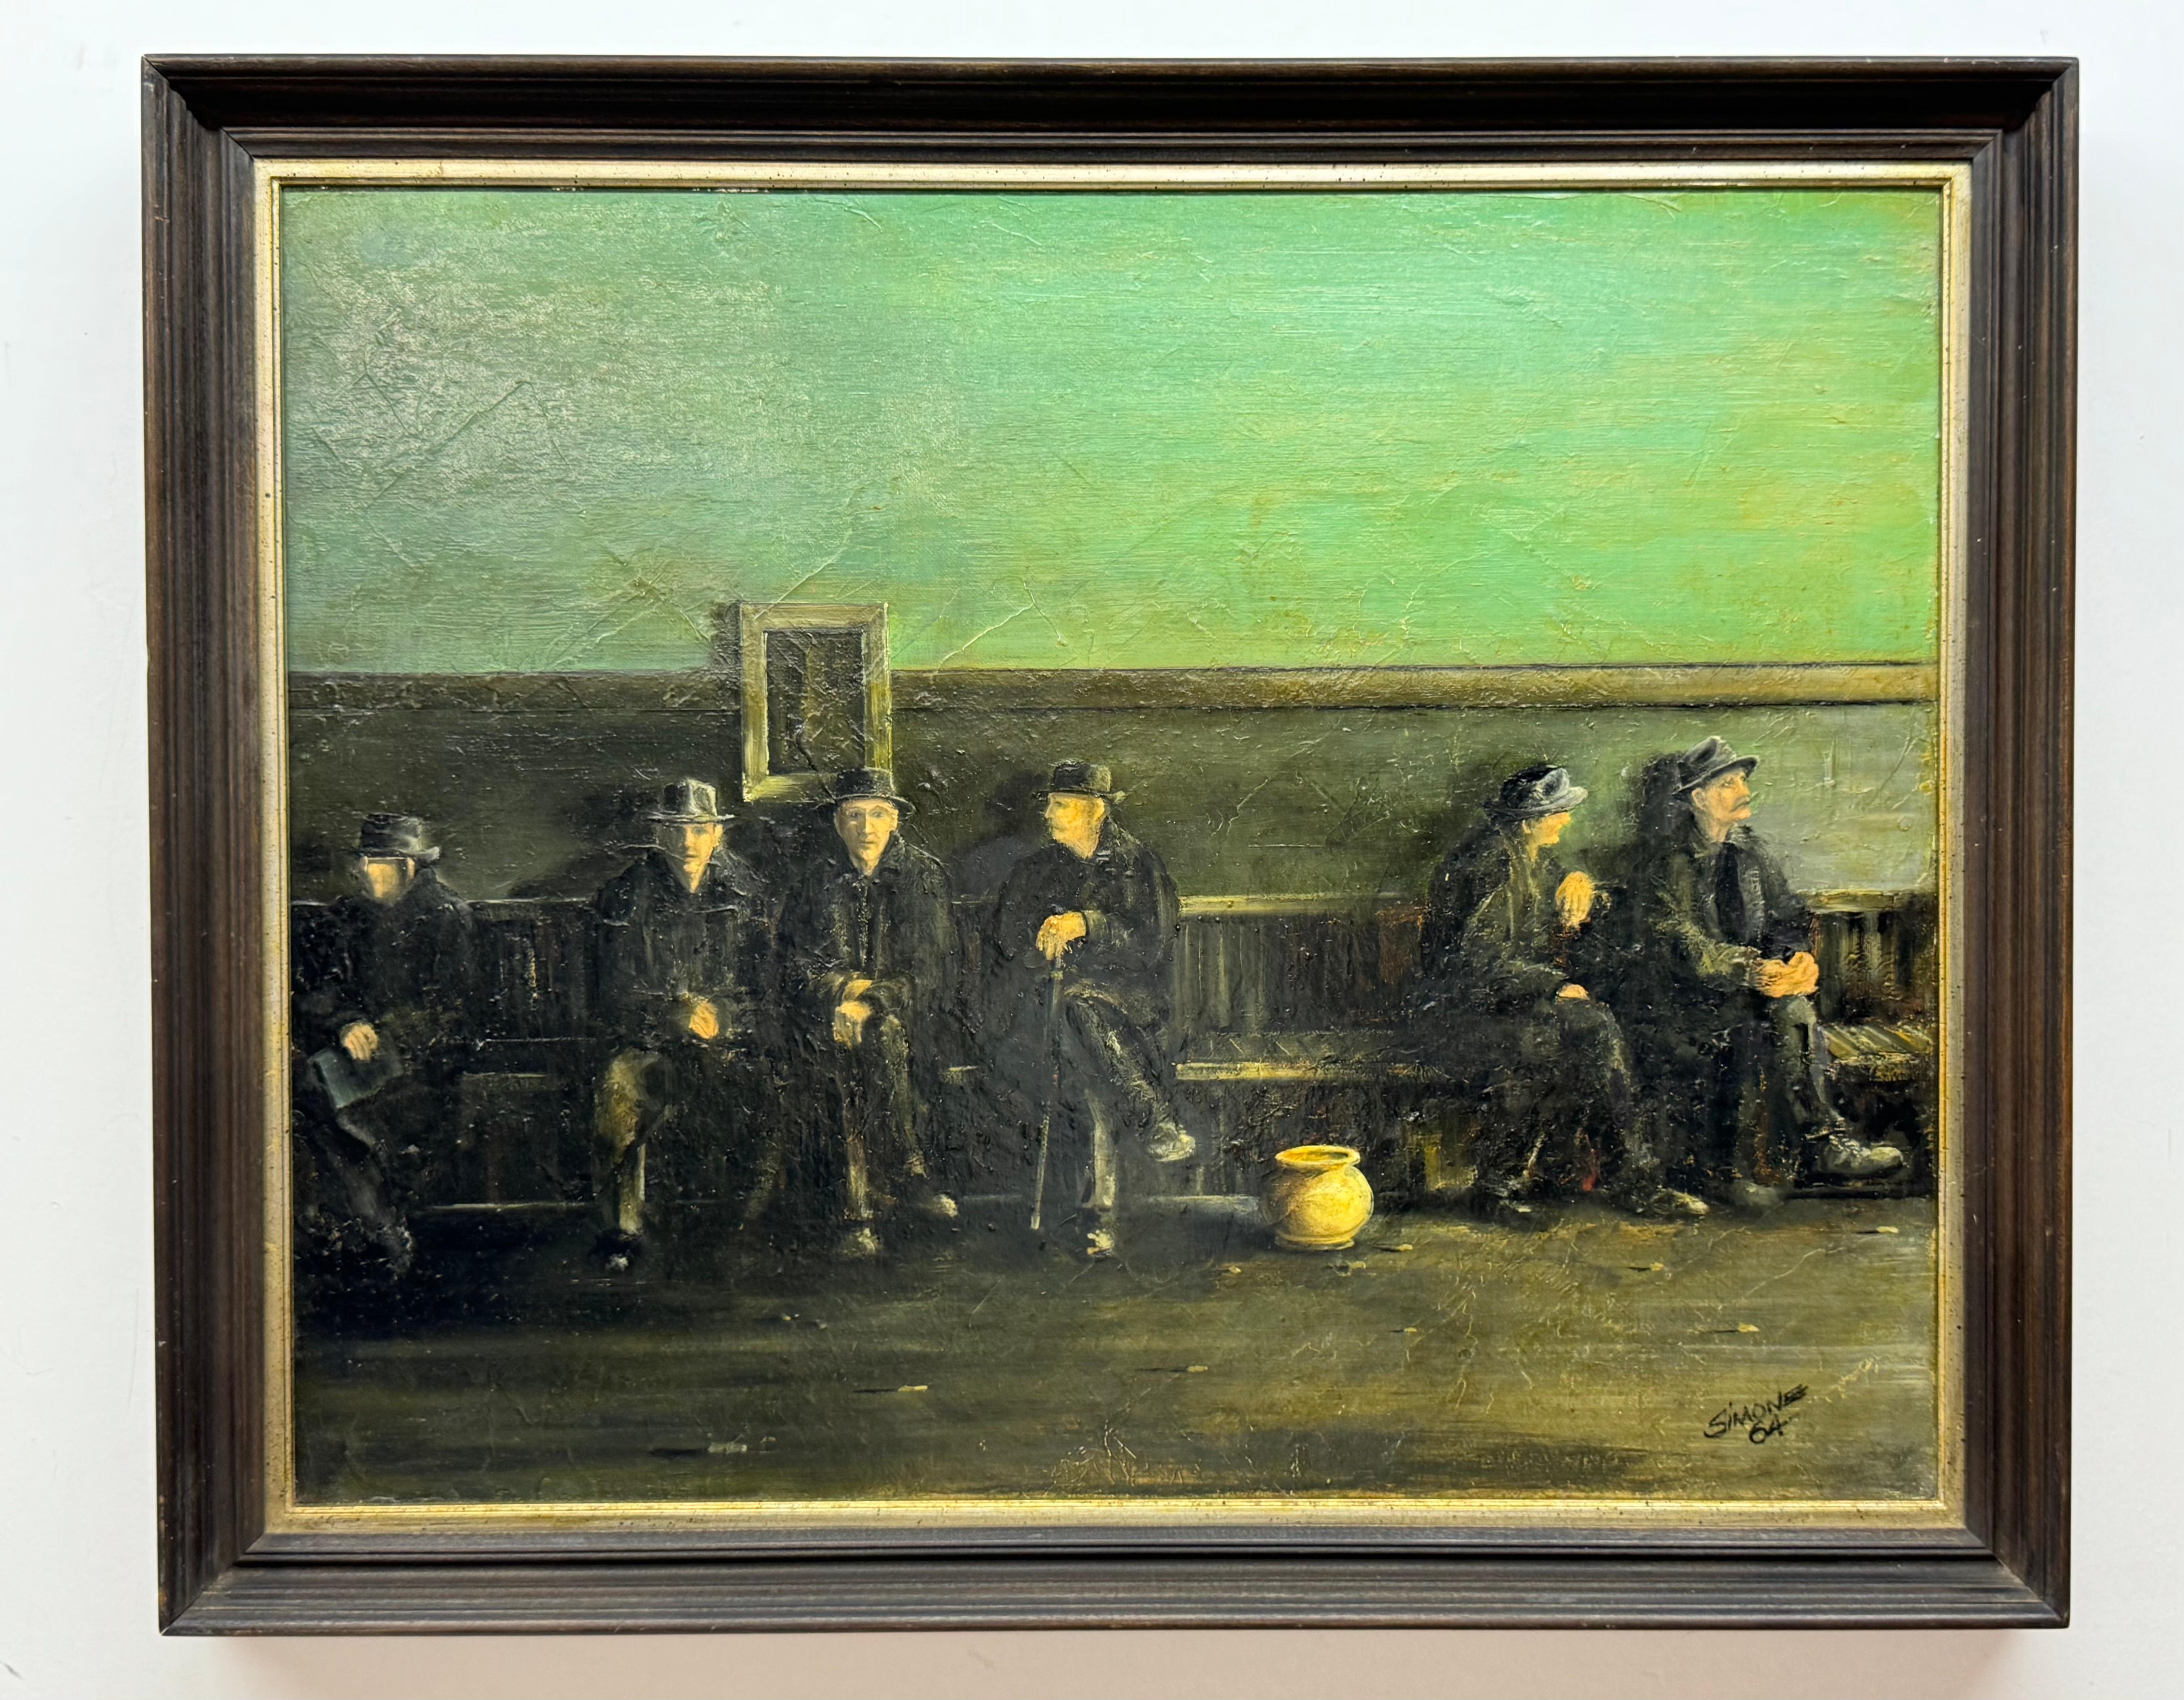 Simone Figurative Painting - Men on Wooden Bench With Large Pot, Oil Painting, 1964